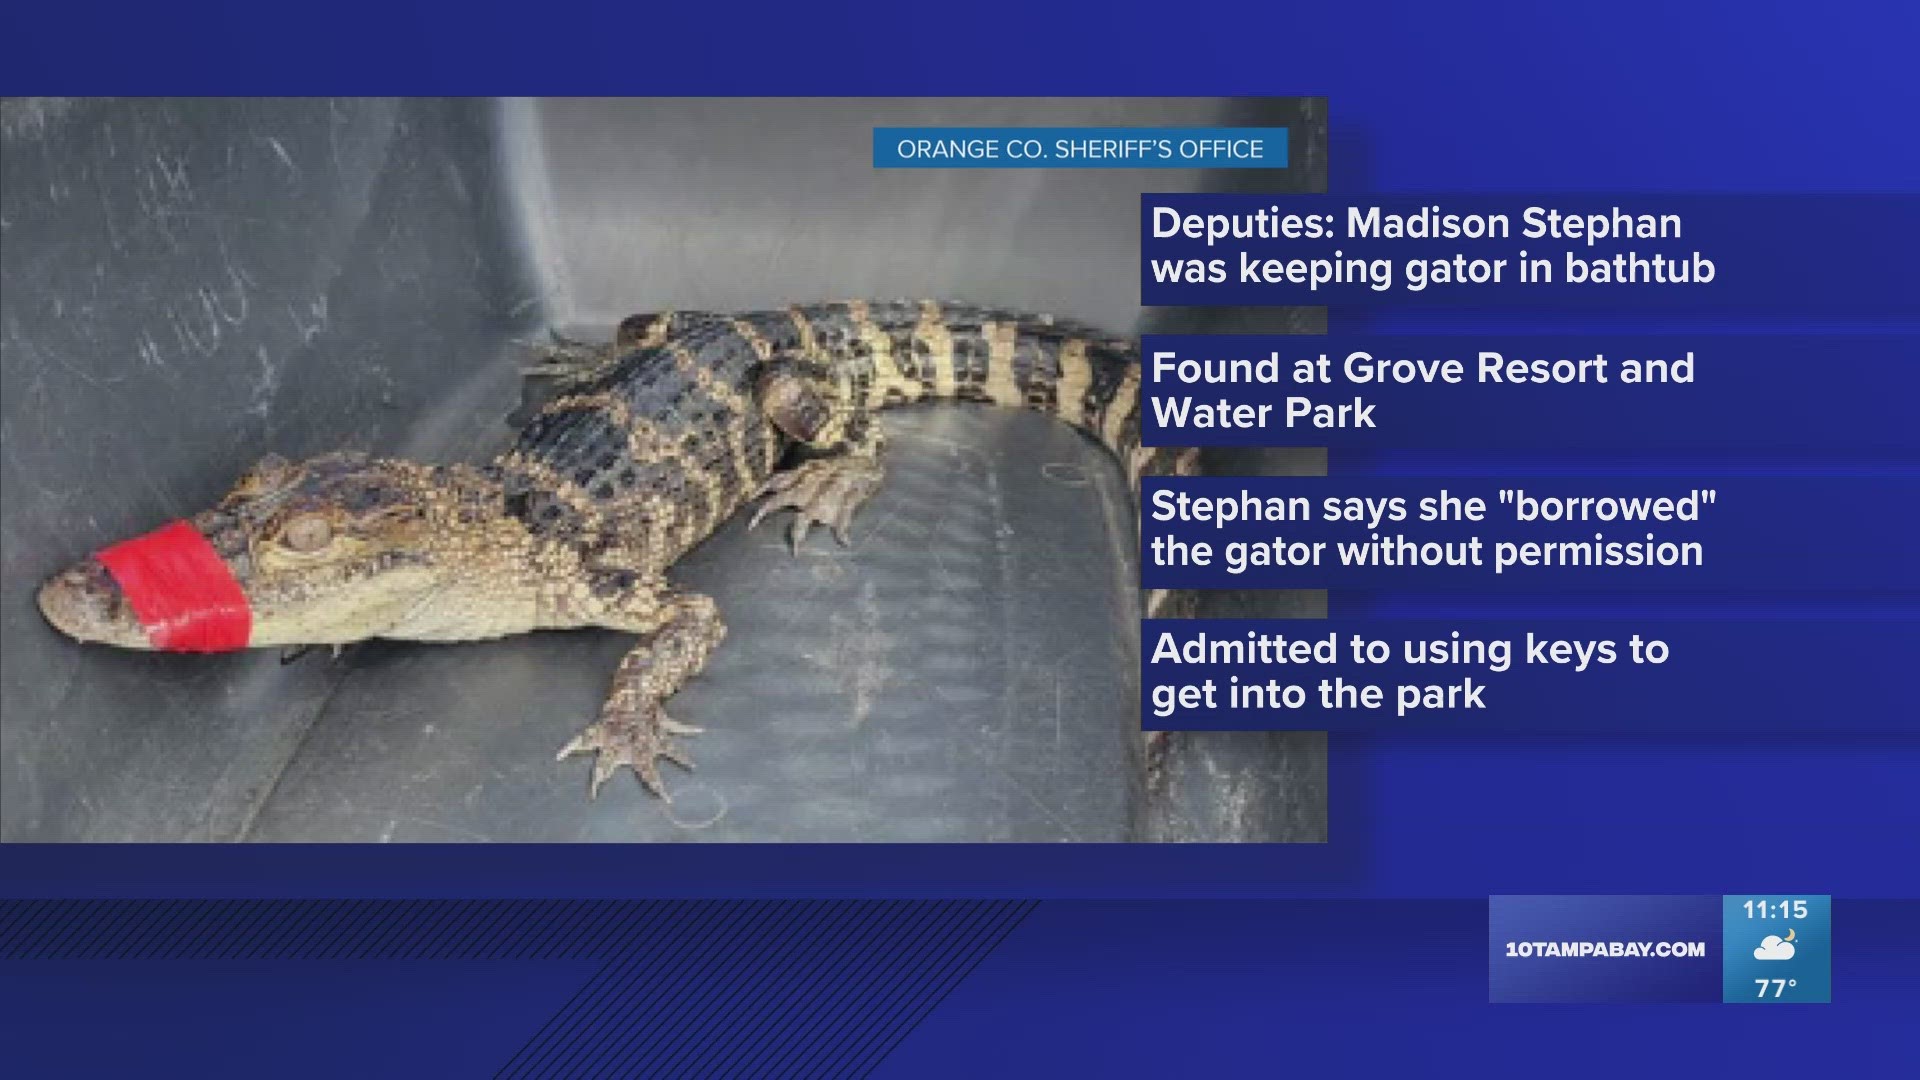 The woman reportedly told officers she got the animal from Croc Encounters where she used to work.